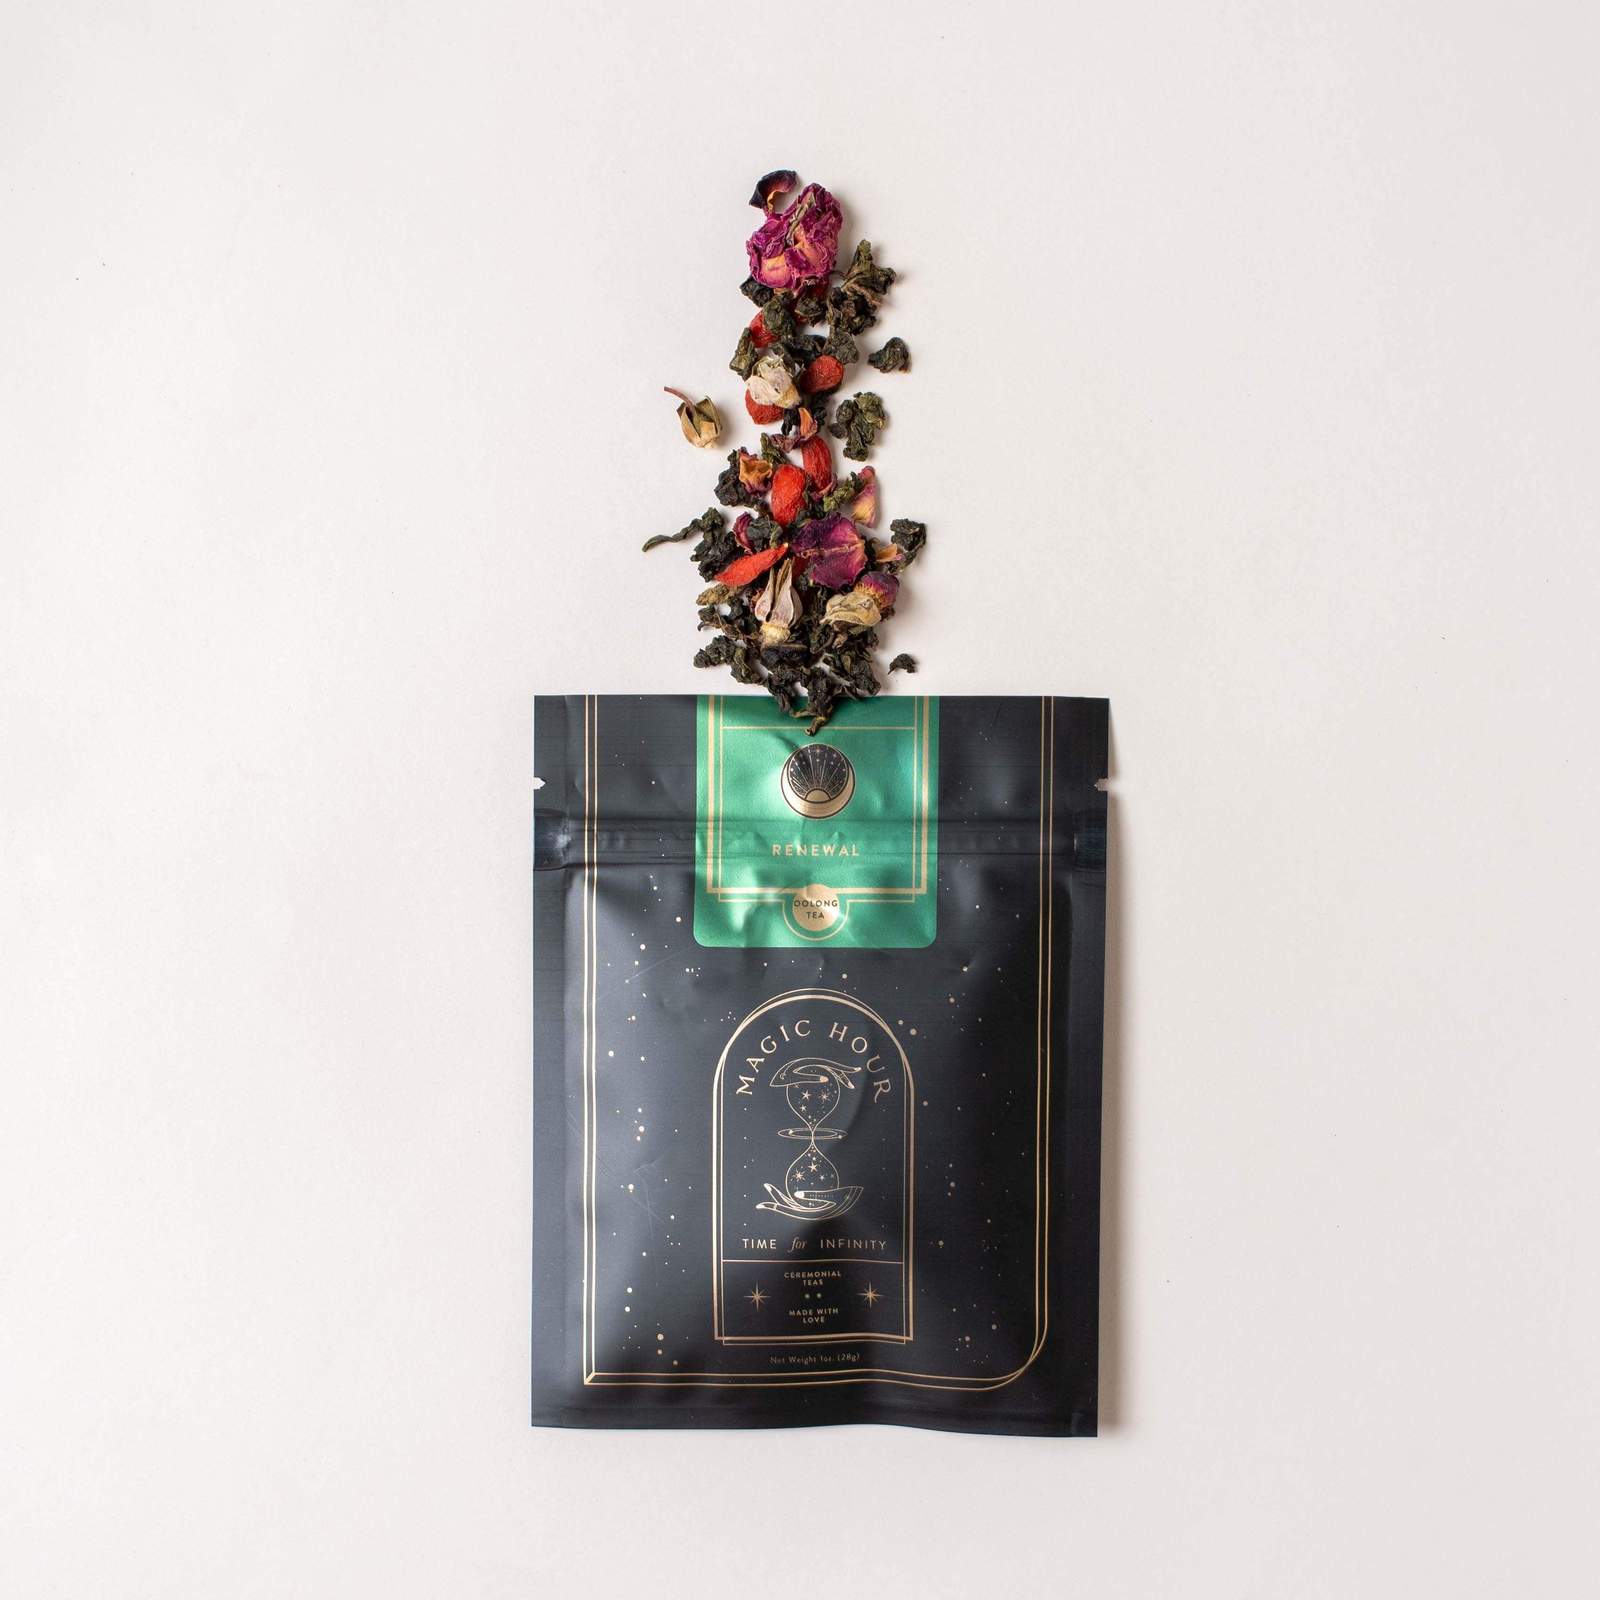 A black and green Magic Hour Renew & Relax: Ritual Gift for Mindfulness & Calm package with intricate gold detailing is laying on a beige surface. The package is open at the top, and a mix of organic loose leaf tea leaves and colorful flower petals is spilling out in a visually appealing arrangement.